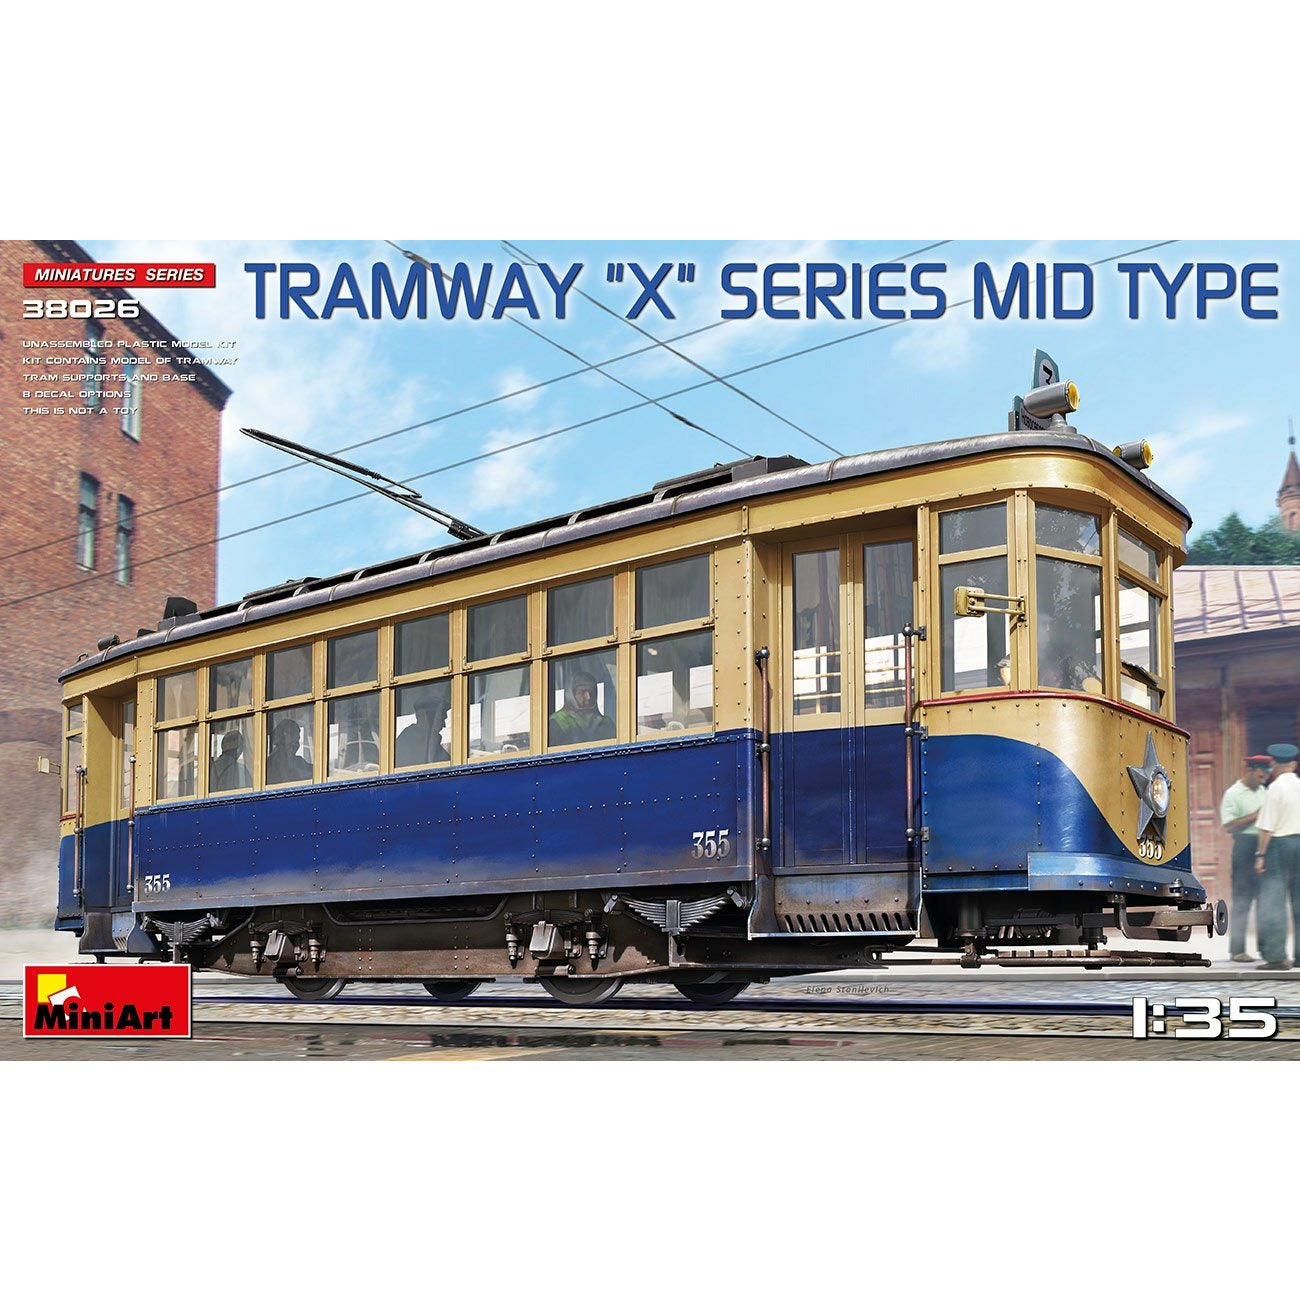 Tramway X-Series Mid Type 1/35 #38026 by Miniart